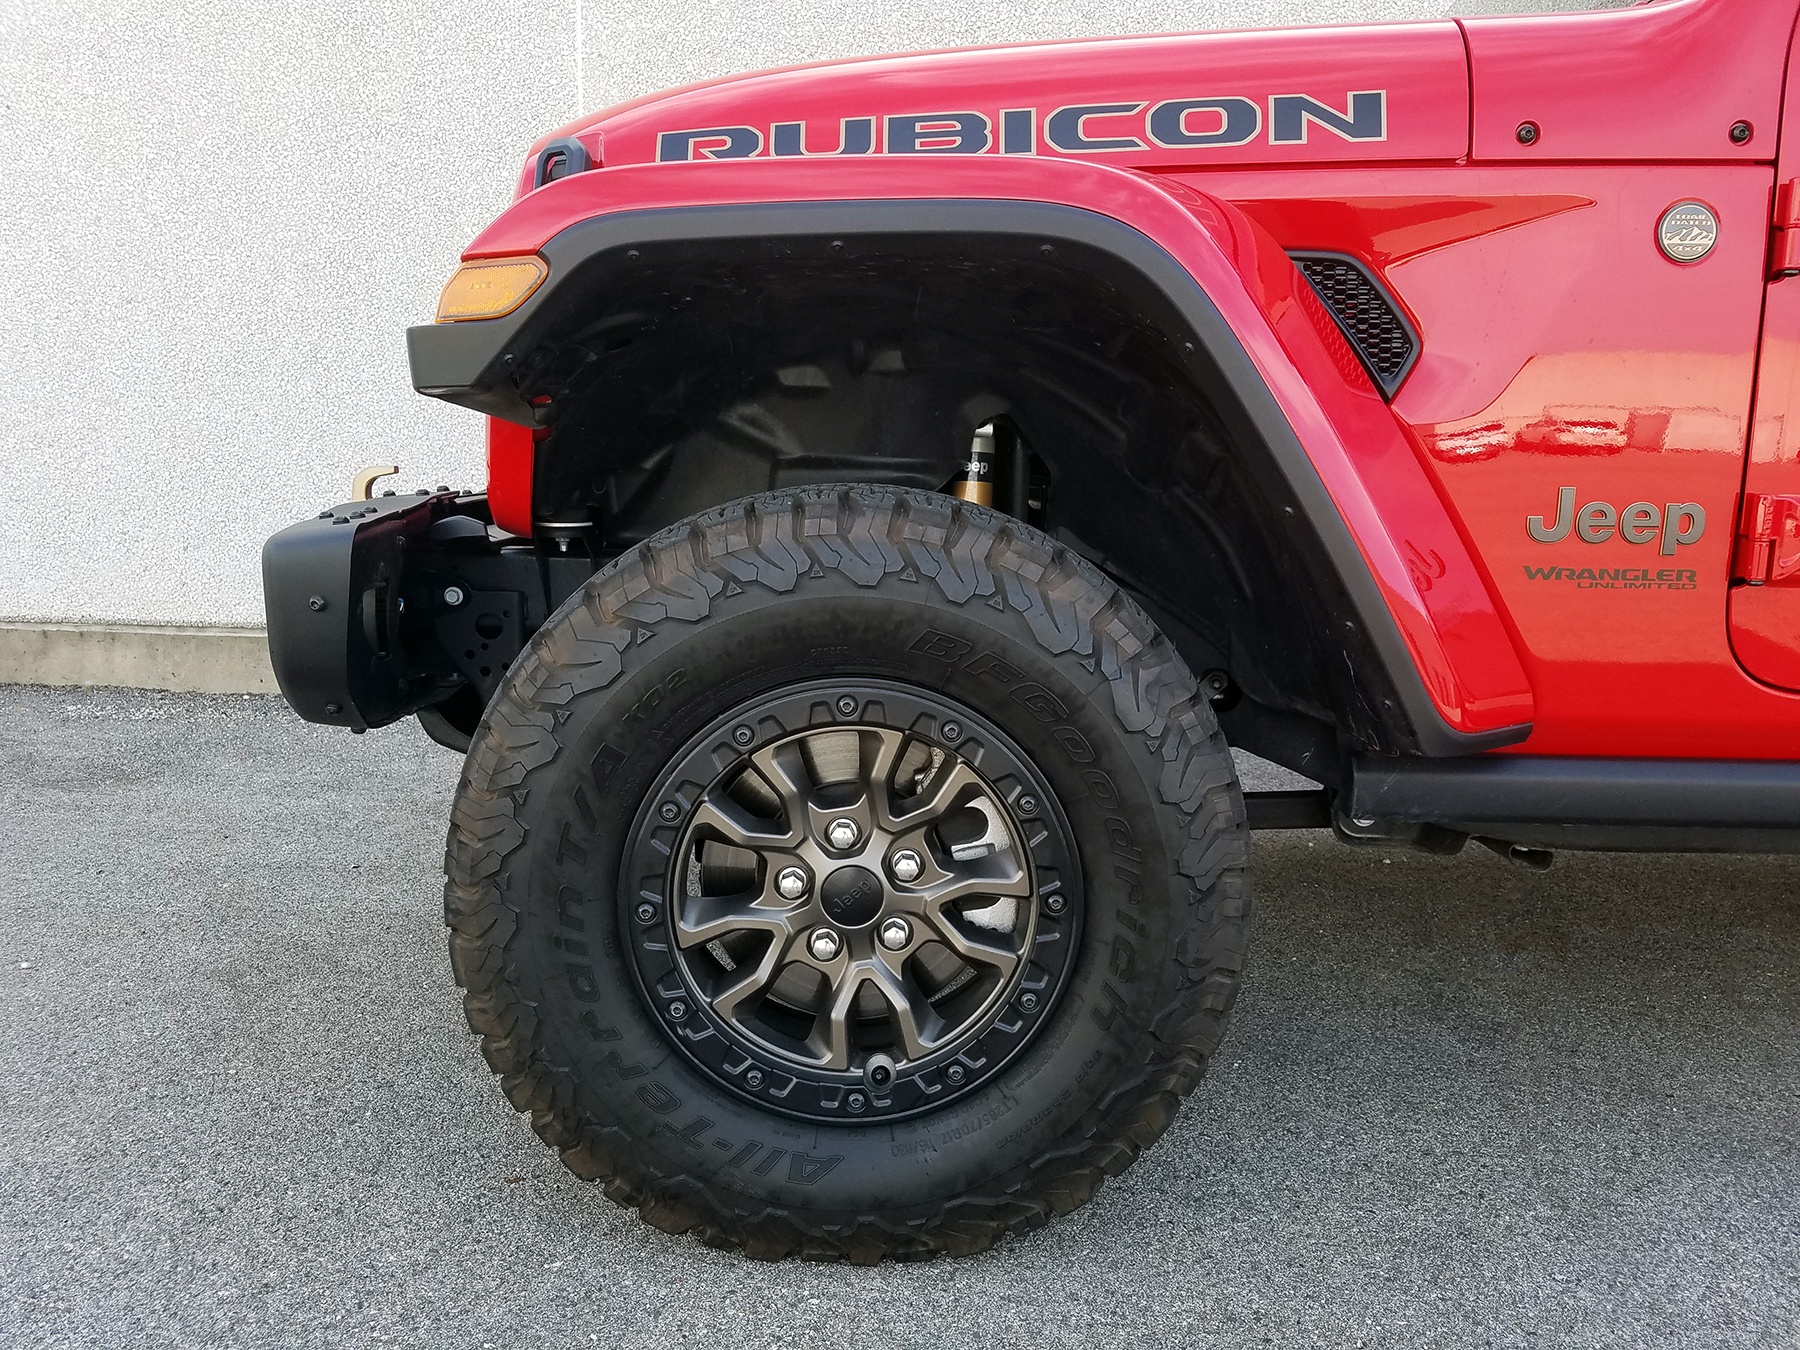 Test Drive: 2021 Jeep Wrangler Unlimited Rubicon 392 | The Daily Drive |  Consumer Guide® The Daily Drive | Consumer Guide®